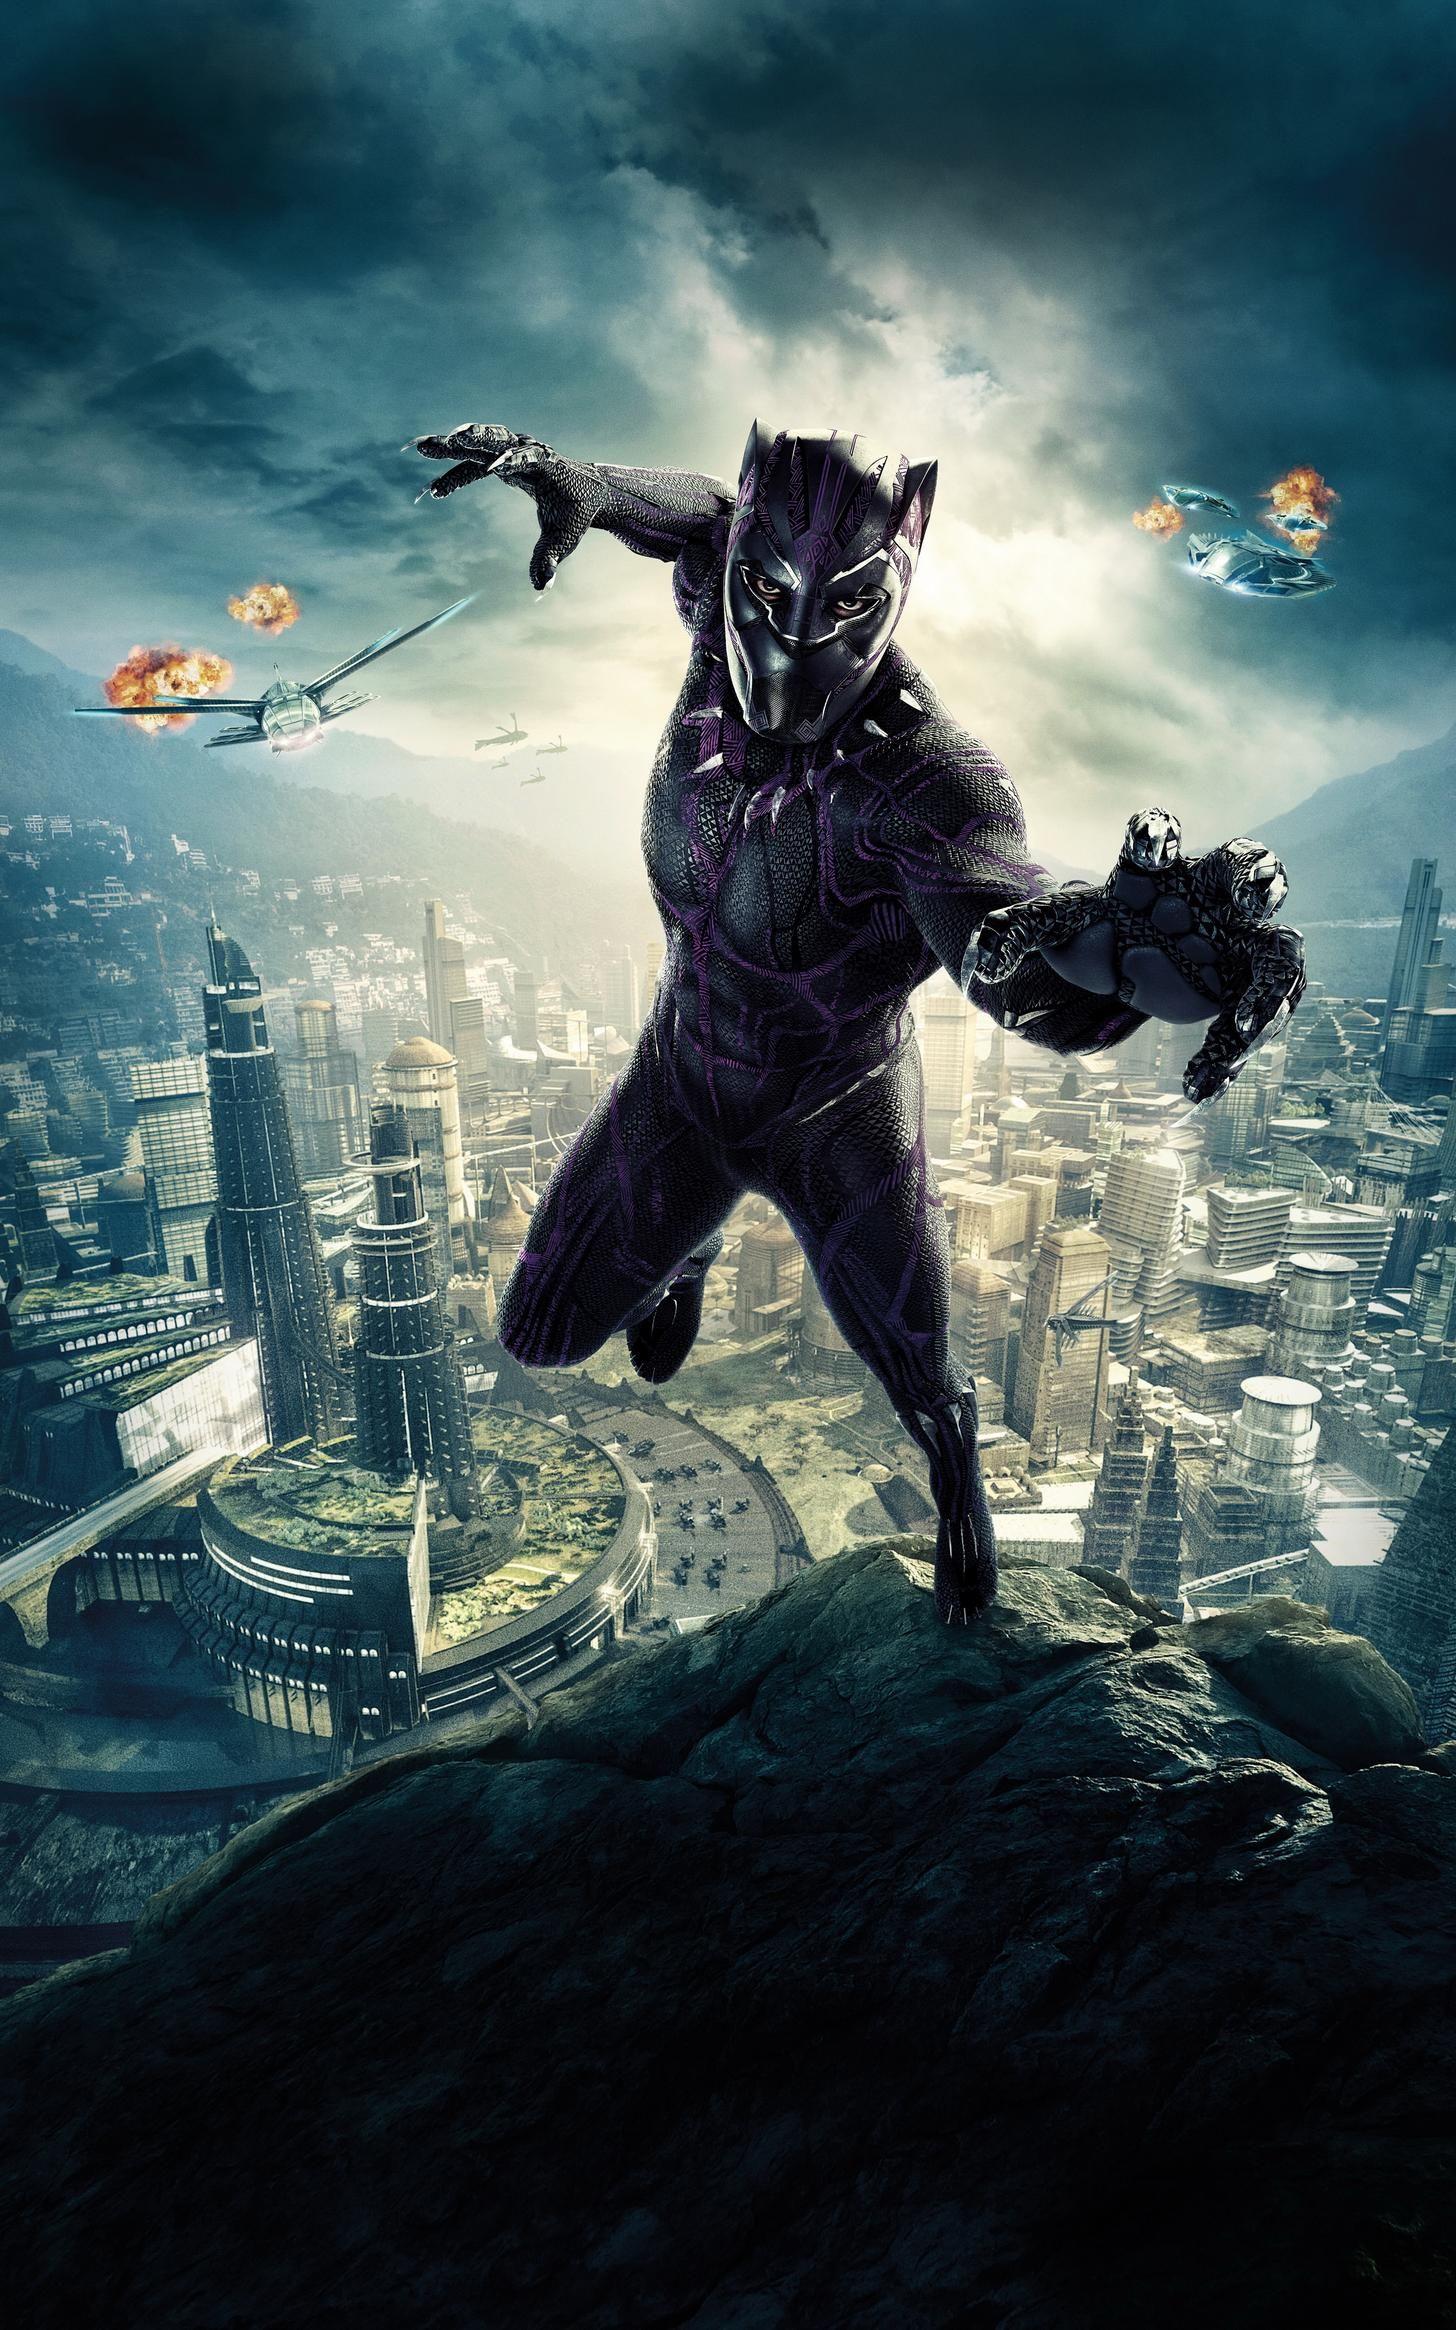 Free download Movie of the Week Black Panther Mobile